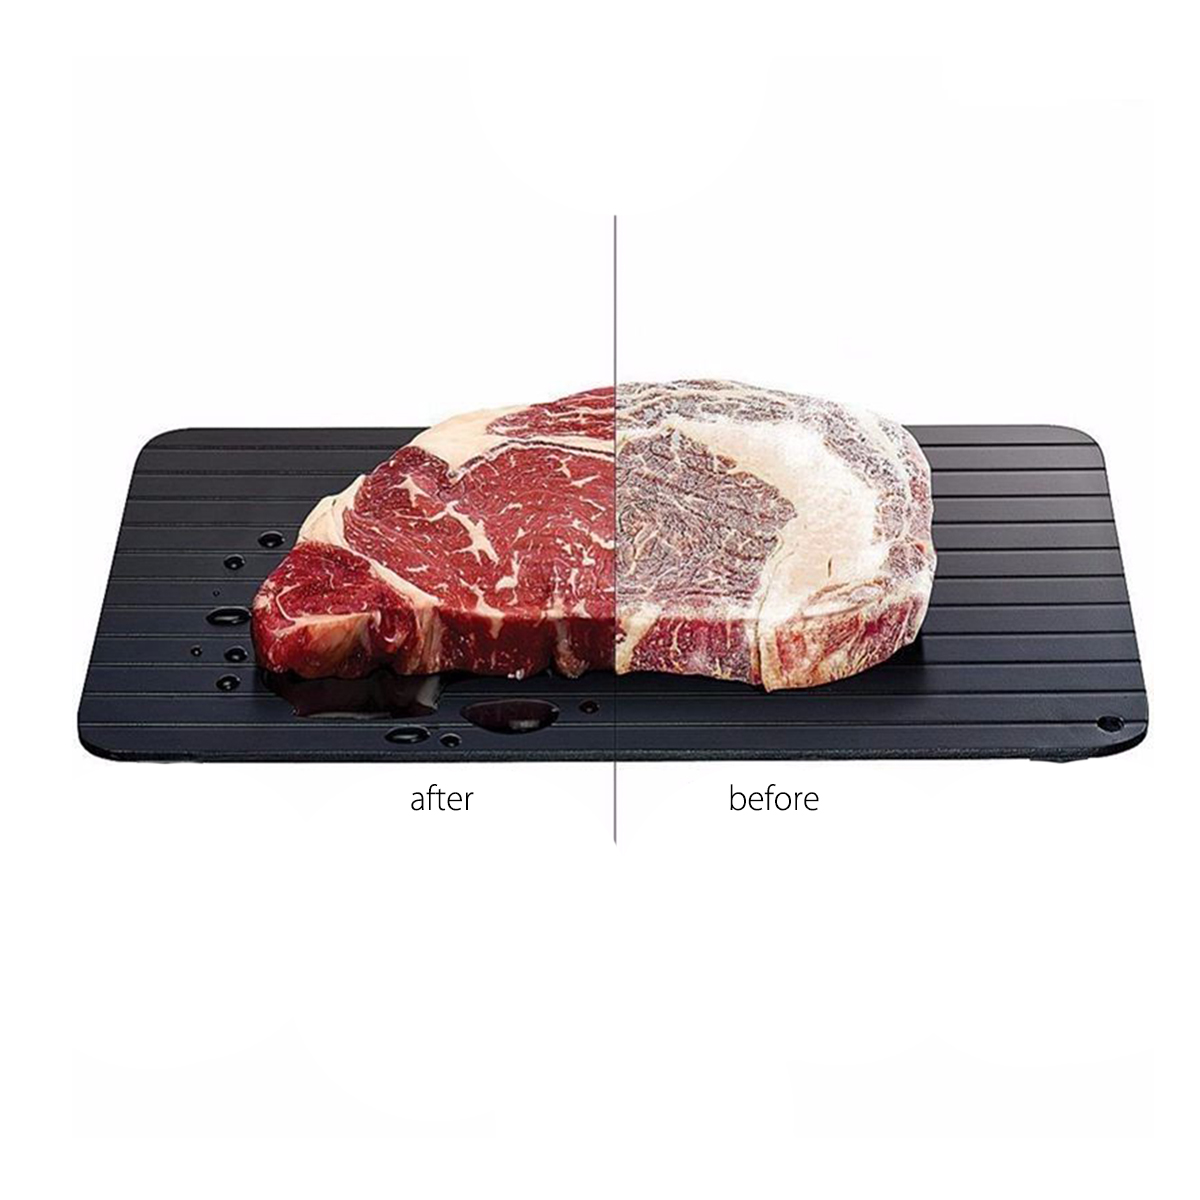 Fast-Thawing-Defrosting-Tray-Kitchen-Safe-Defrost-Thaw-Frozen-Meat-Food-Fast-Defrosting-Tray-Tools-1279583